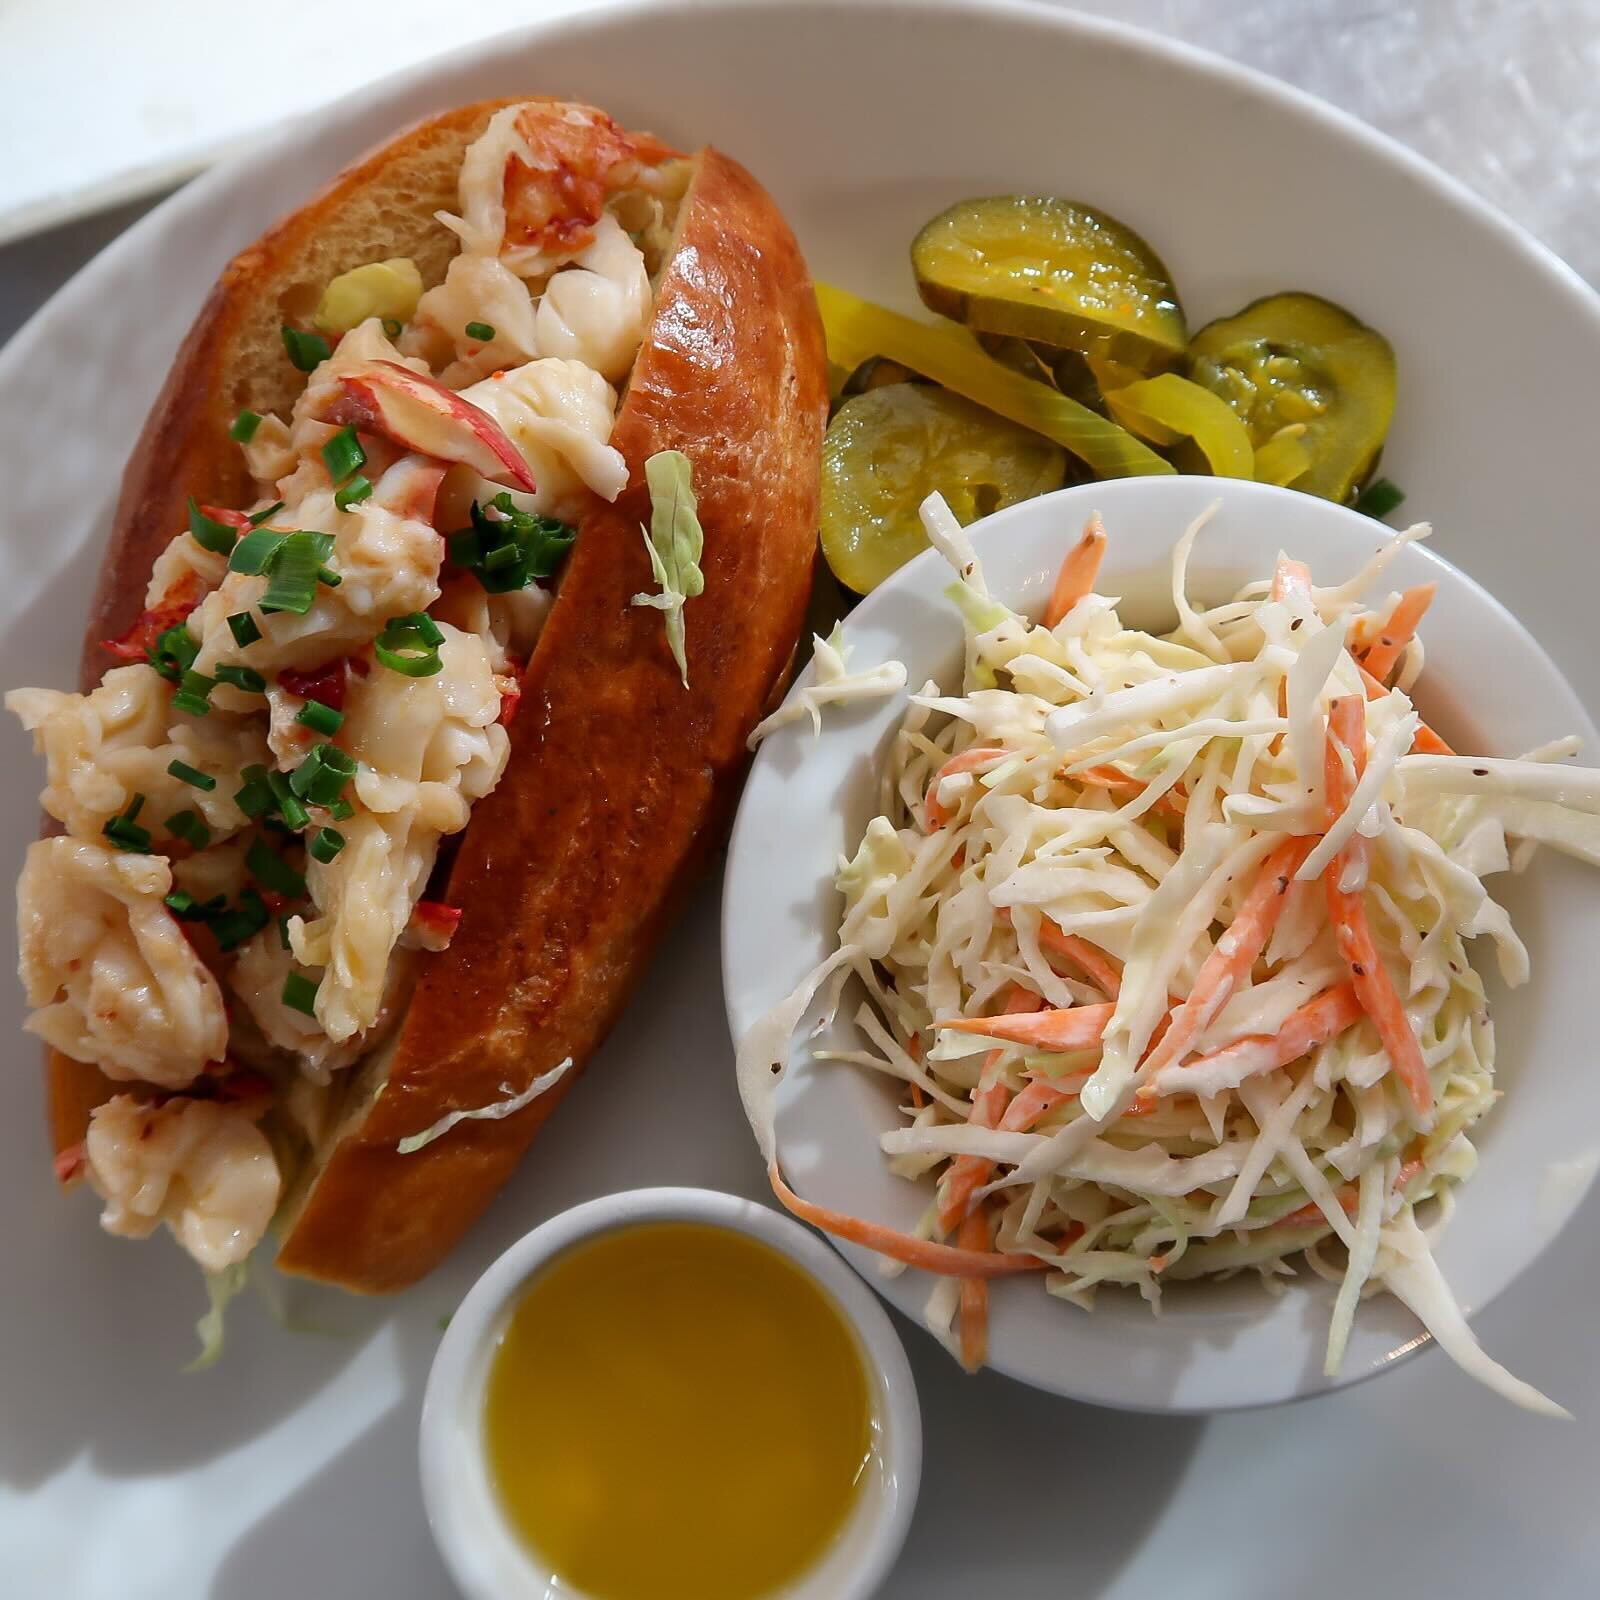 You cannot say no to a lobster roll. 🦞

1020 Post Road Darien, CT 06820
203 655 1020

#connecticuteats #203local #connecticutfoodie #cteats #foodie